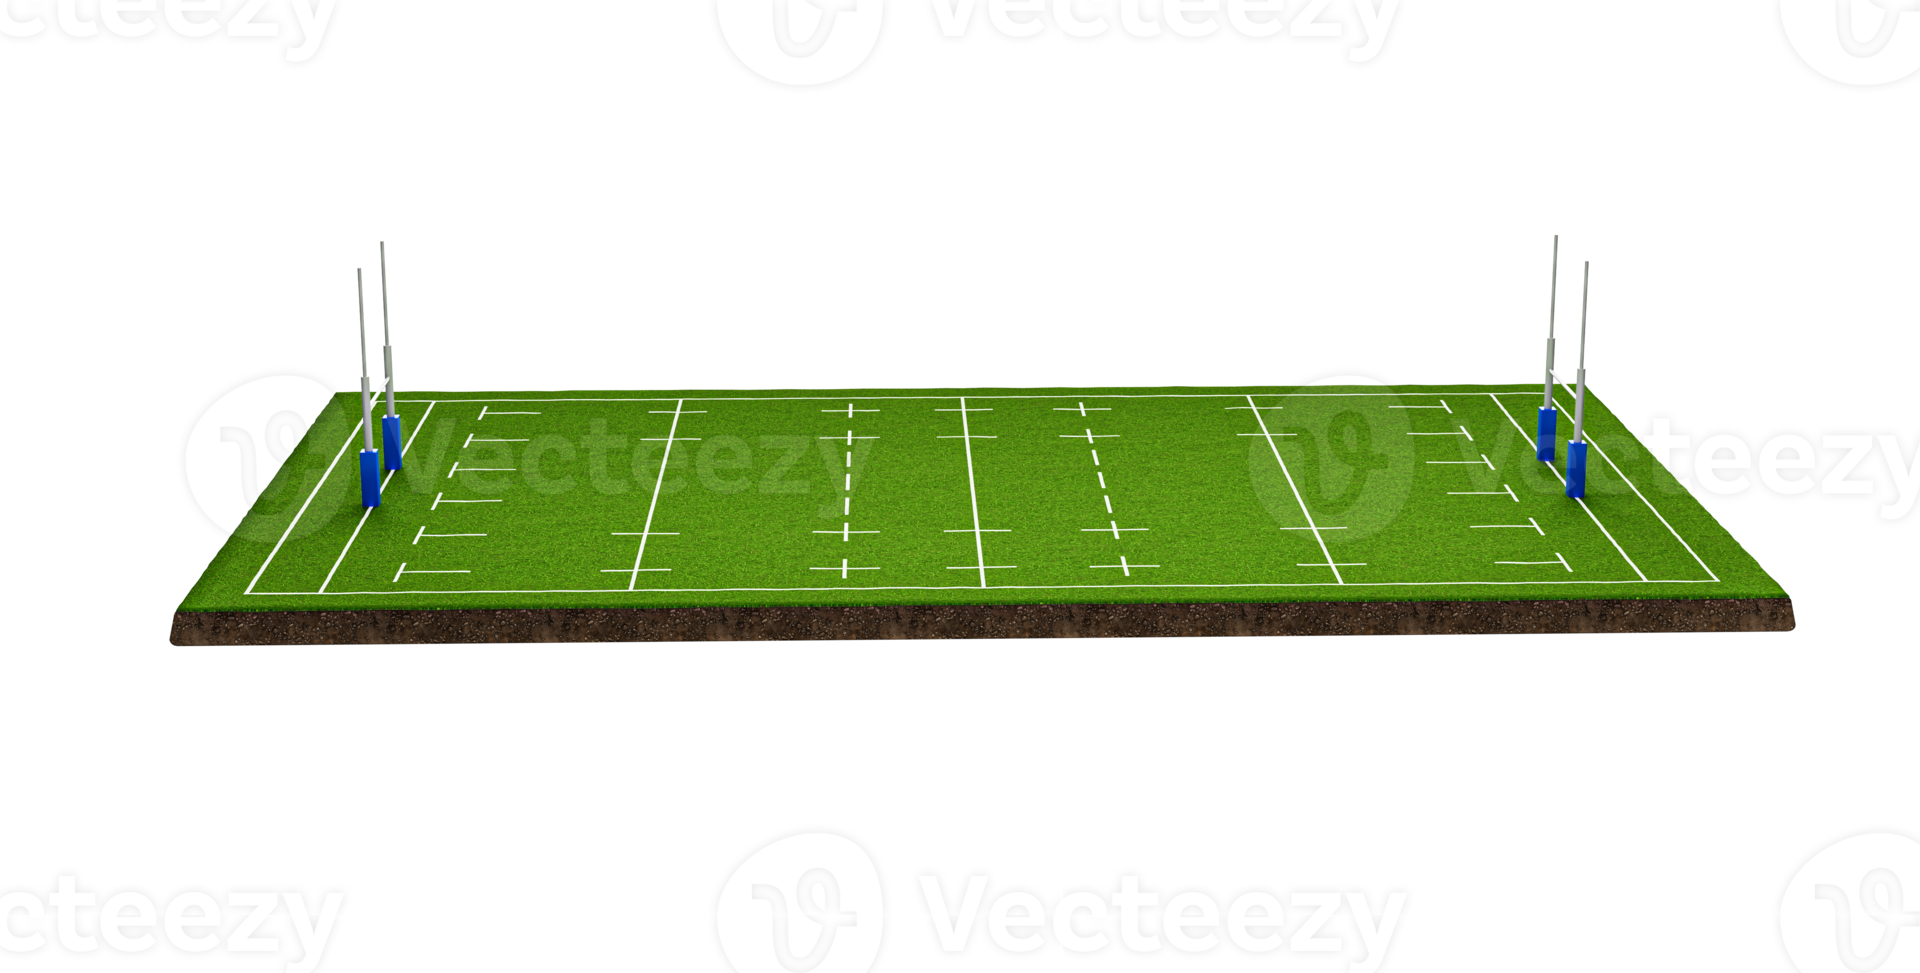 Rugby stadium front view or American football field Ground cross section with green grass field 3d illustration png